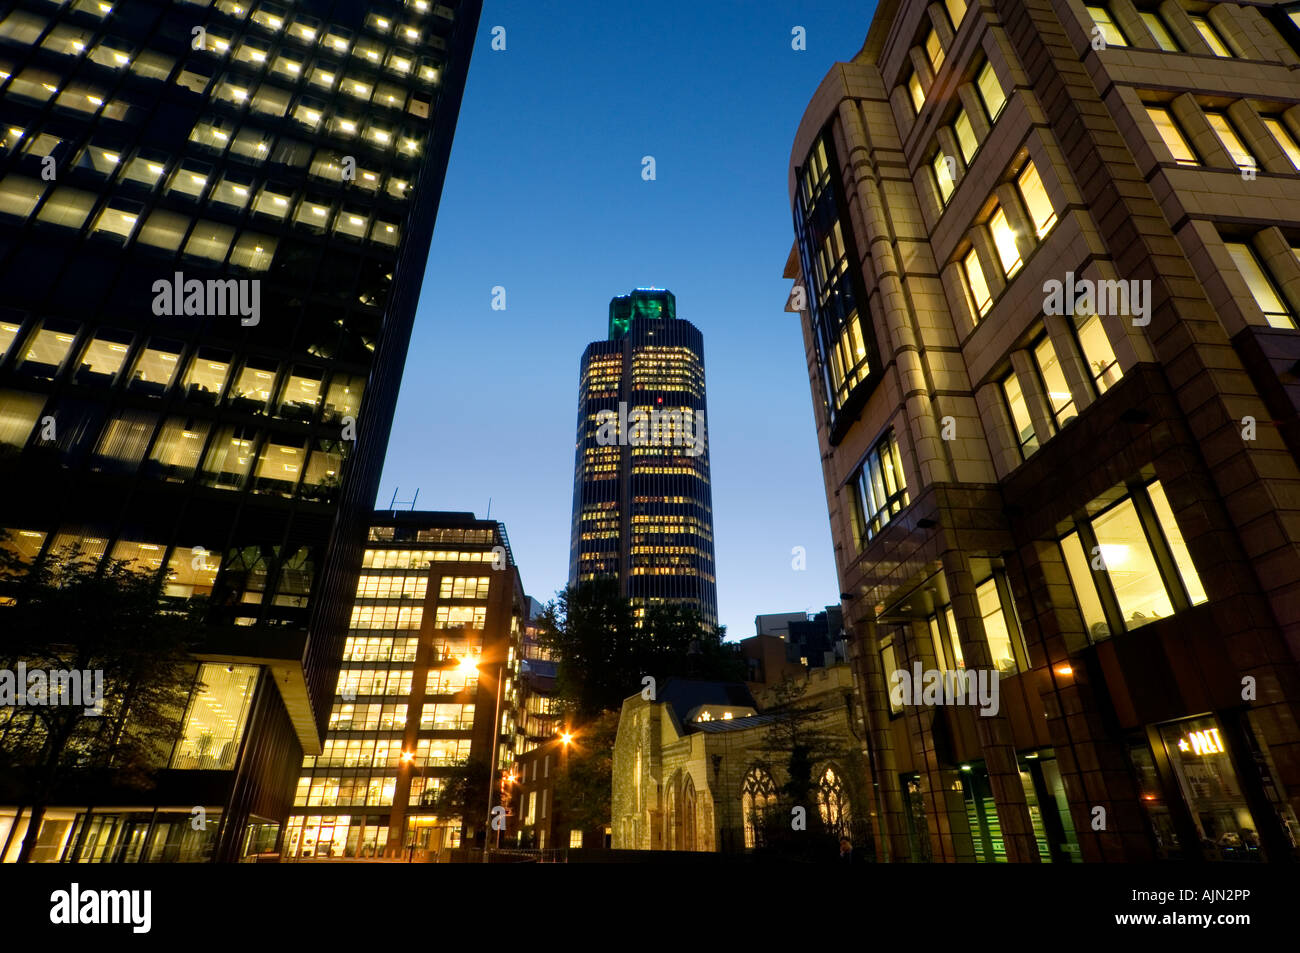 old nat west tower tower 52 illuminated at night central london financial district london england uk Stock Photo